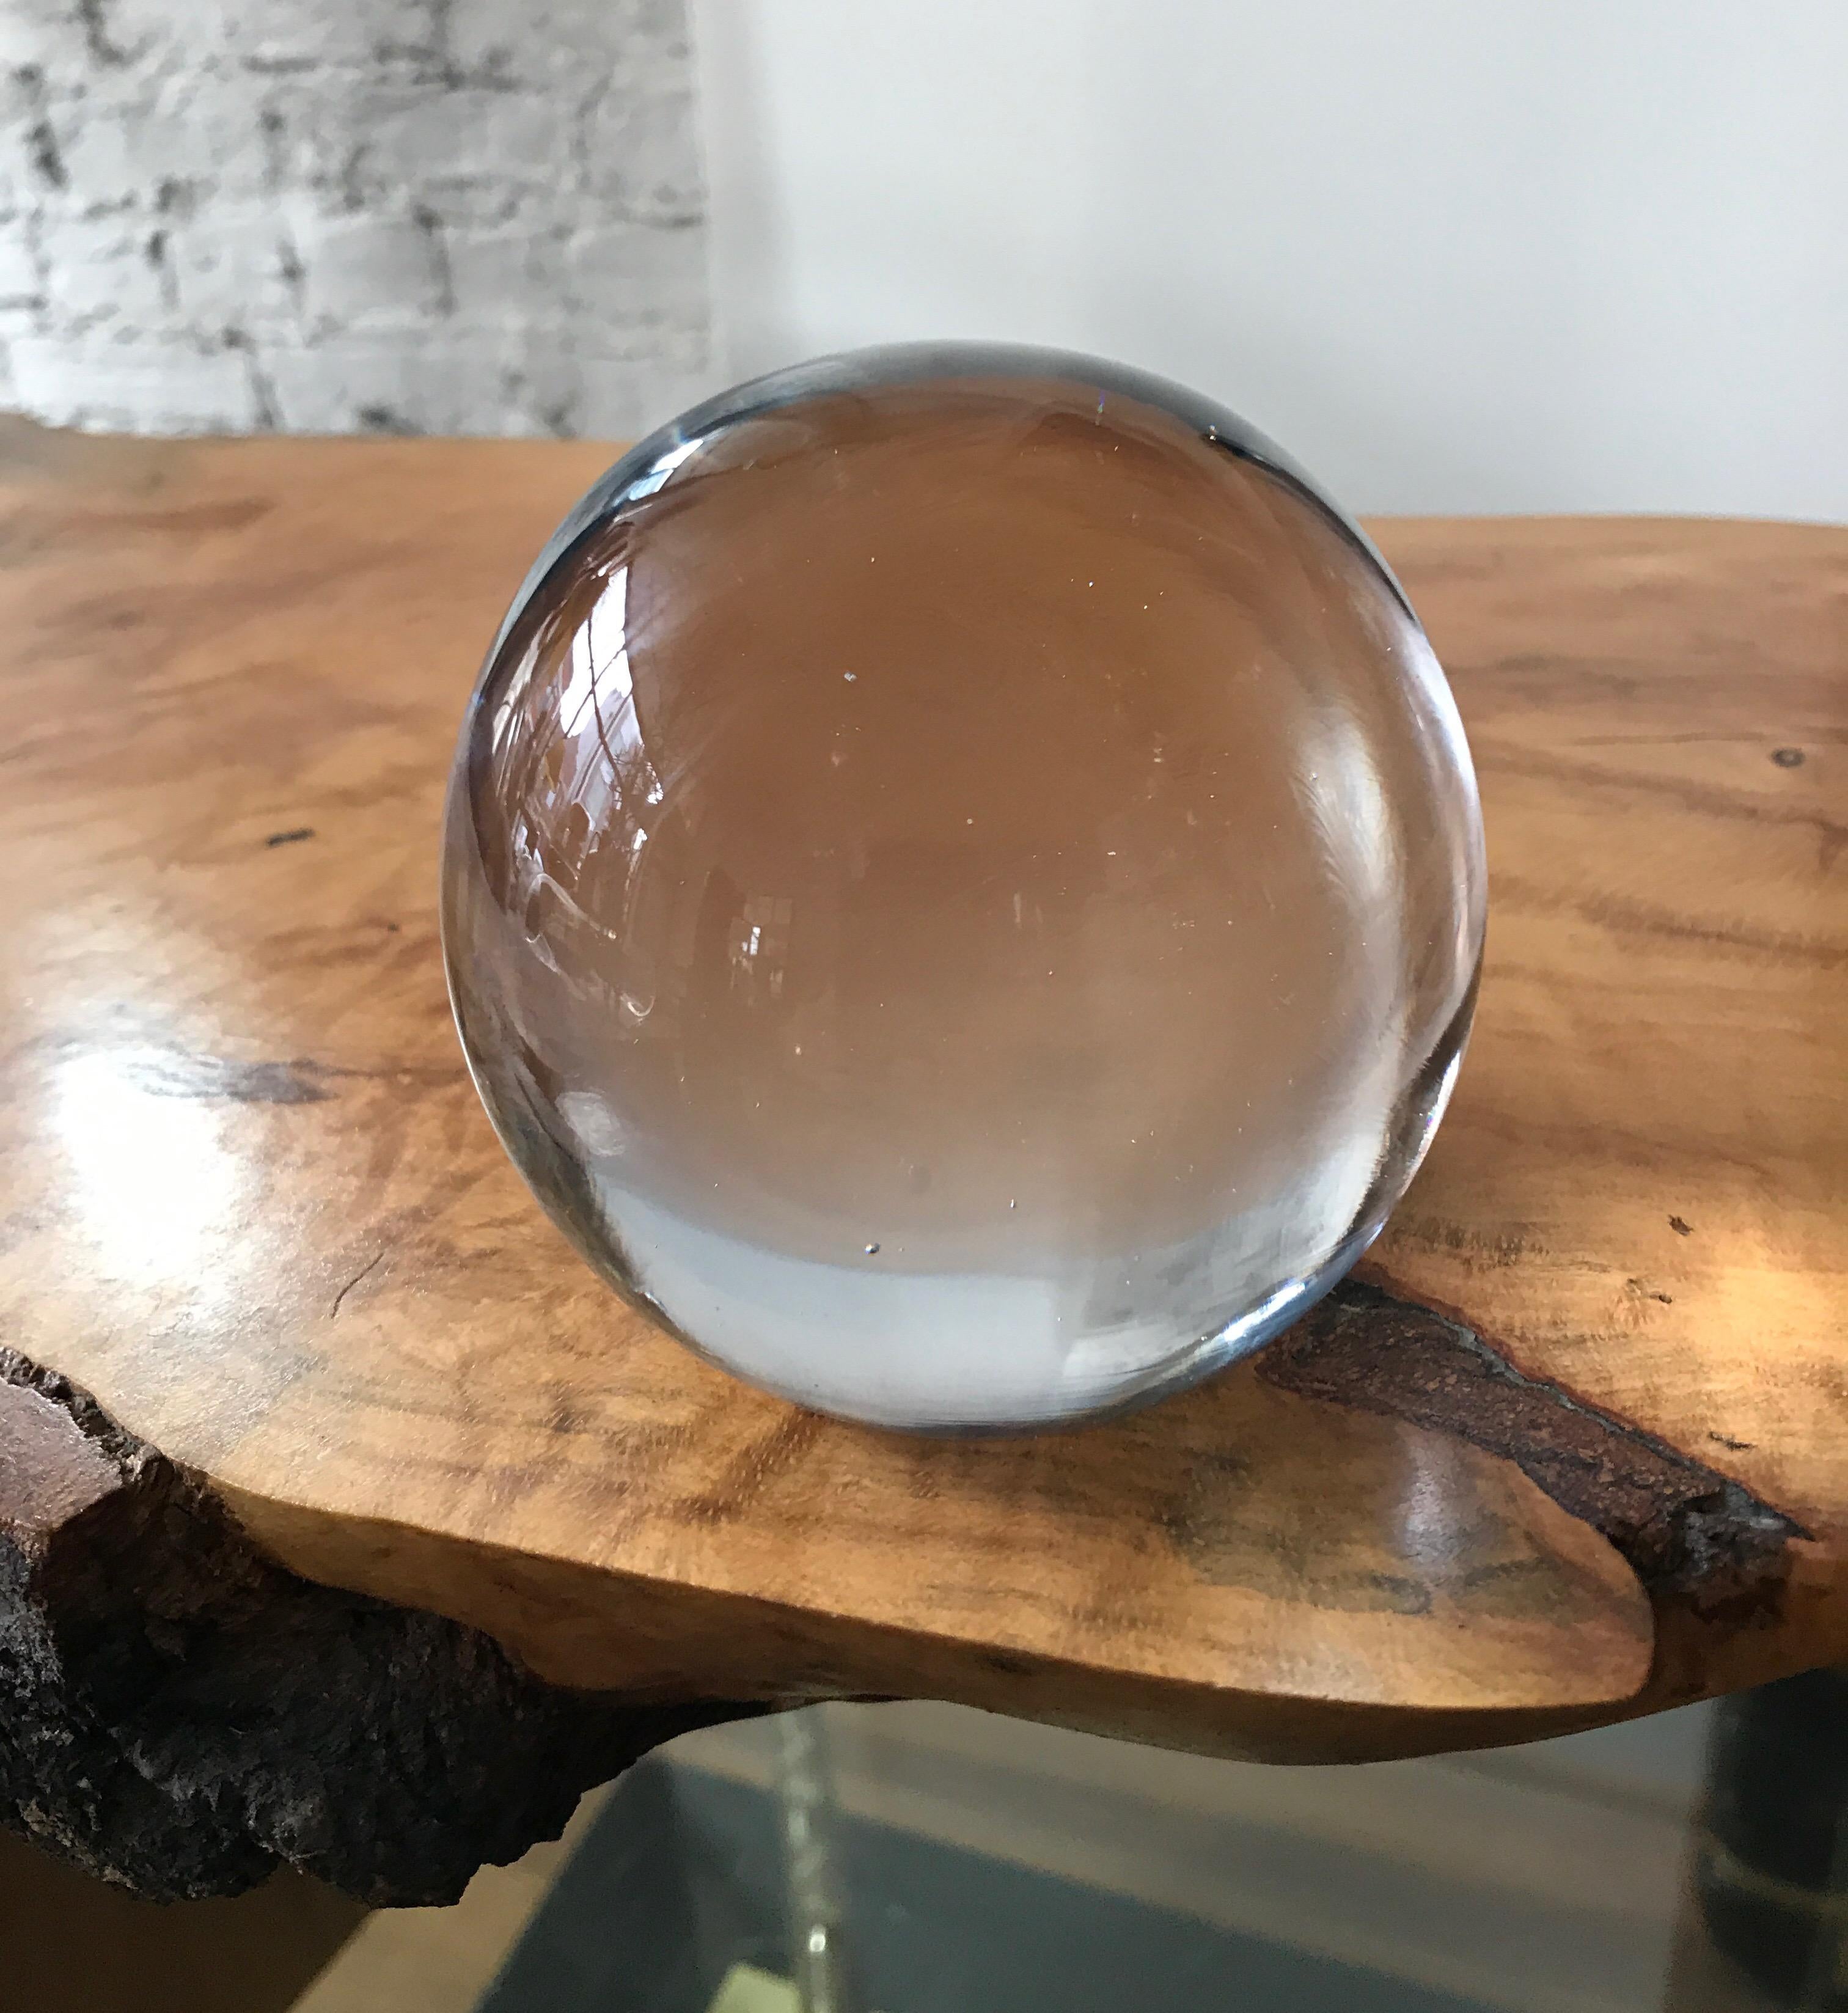 Large Murano midcentury glass round paperweight.
Great desk accessory or tabletop decorative object.